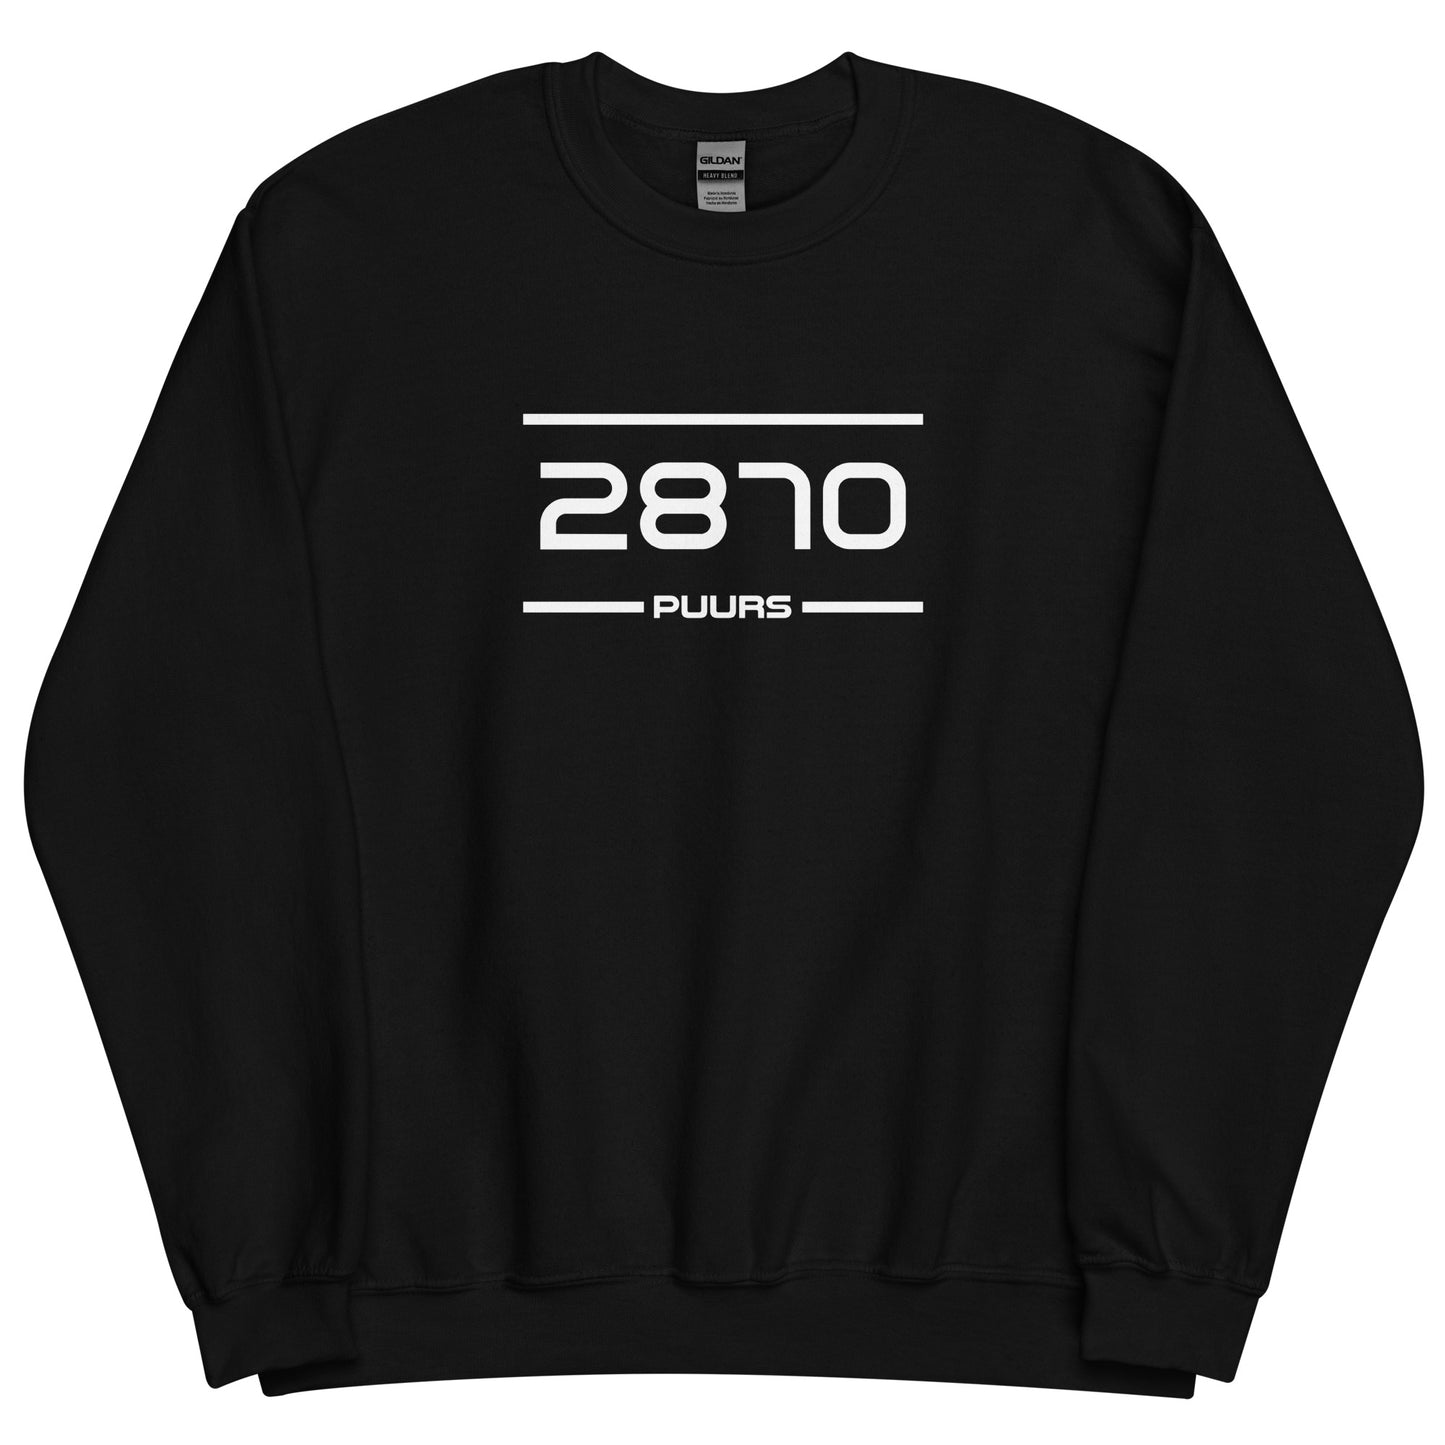 Sweater - 2870 - Puurs (M/V)